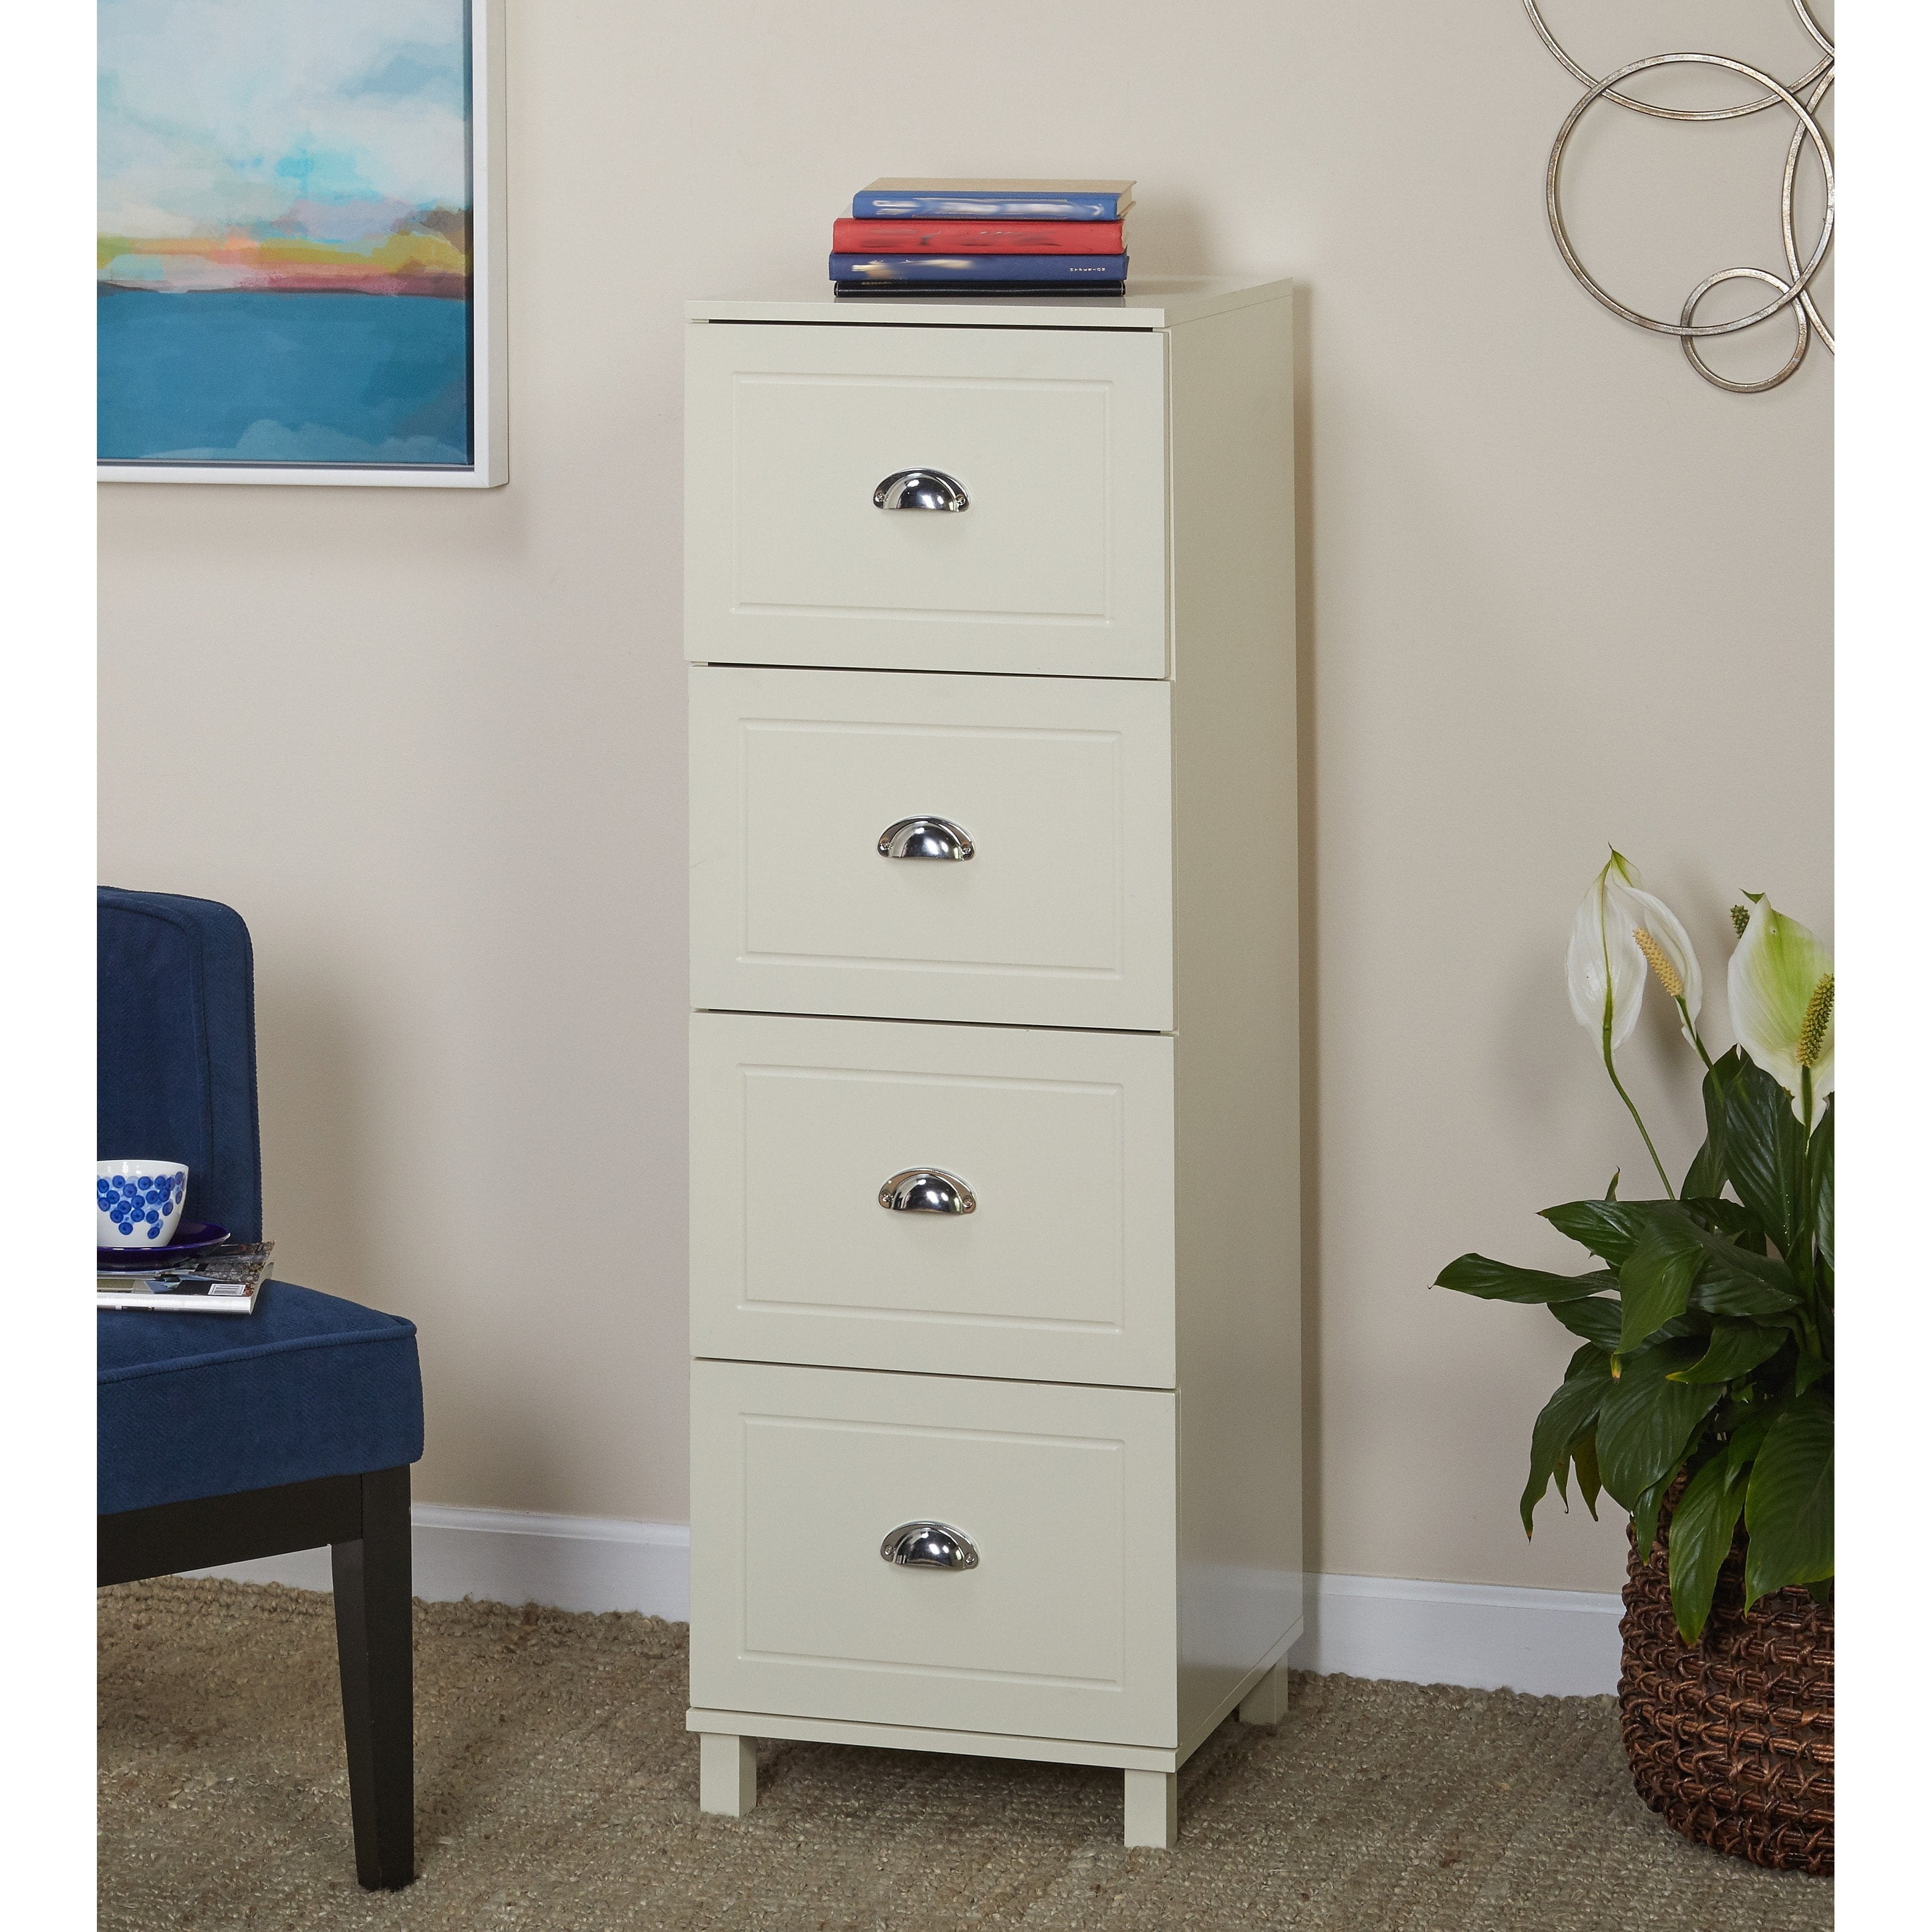 White Wood Filing Cabinet - Filing Cabinets